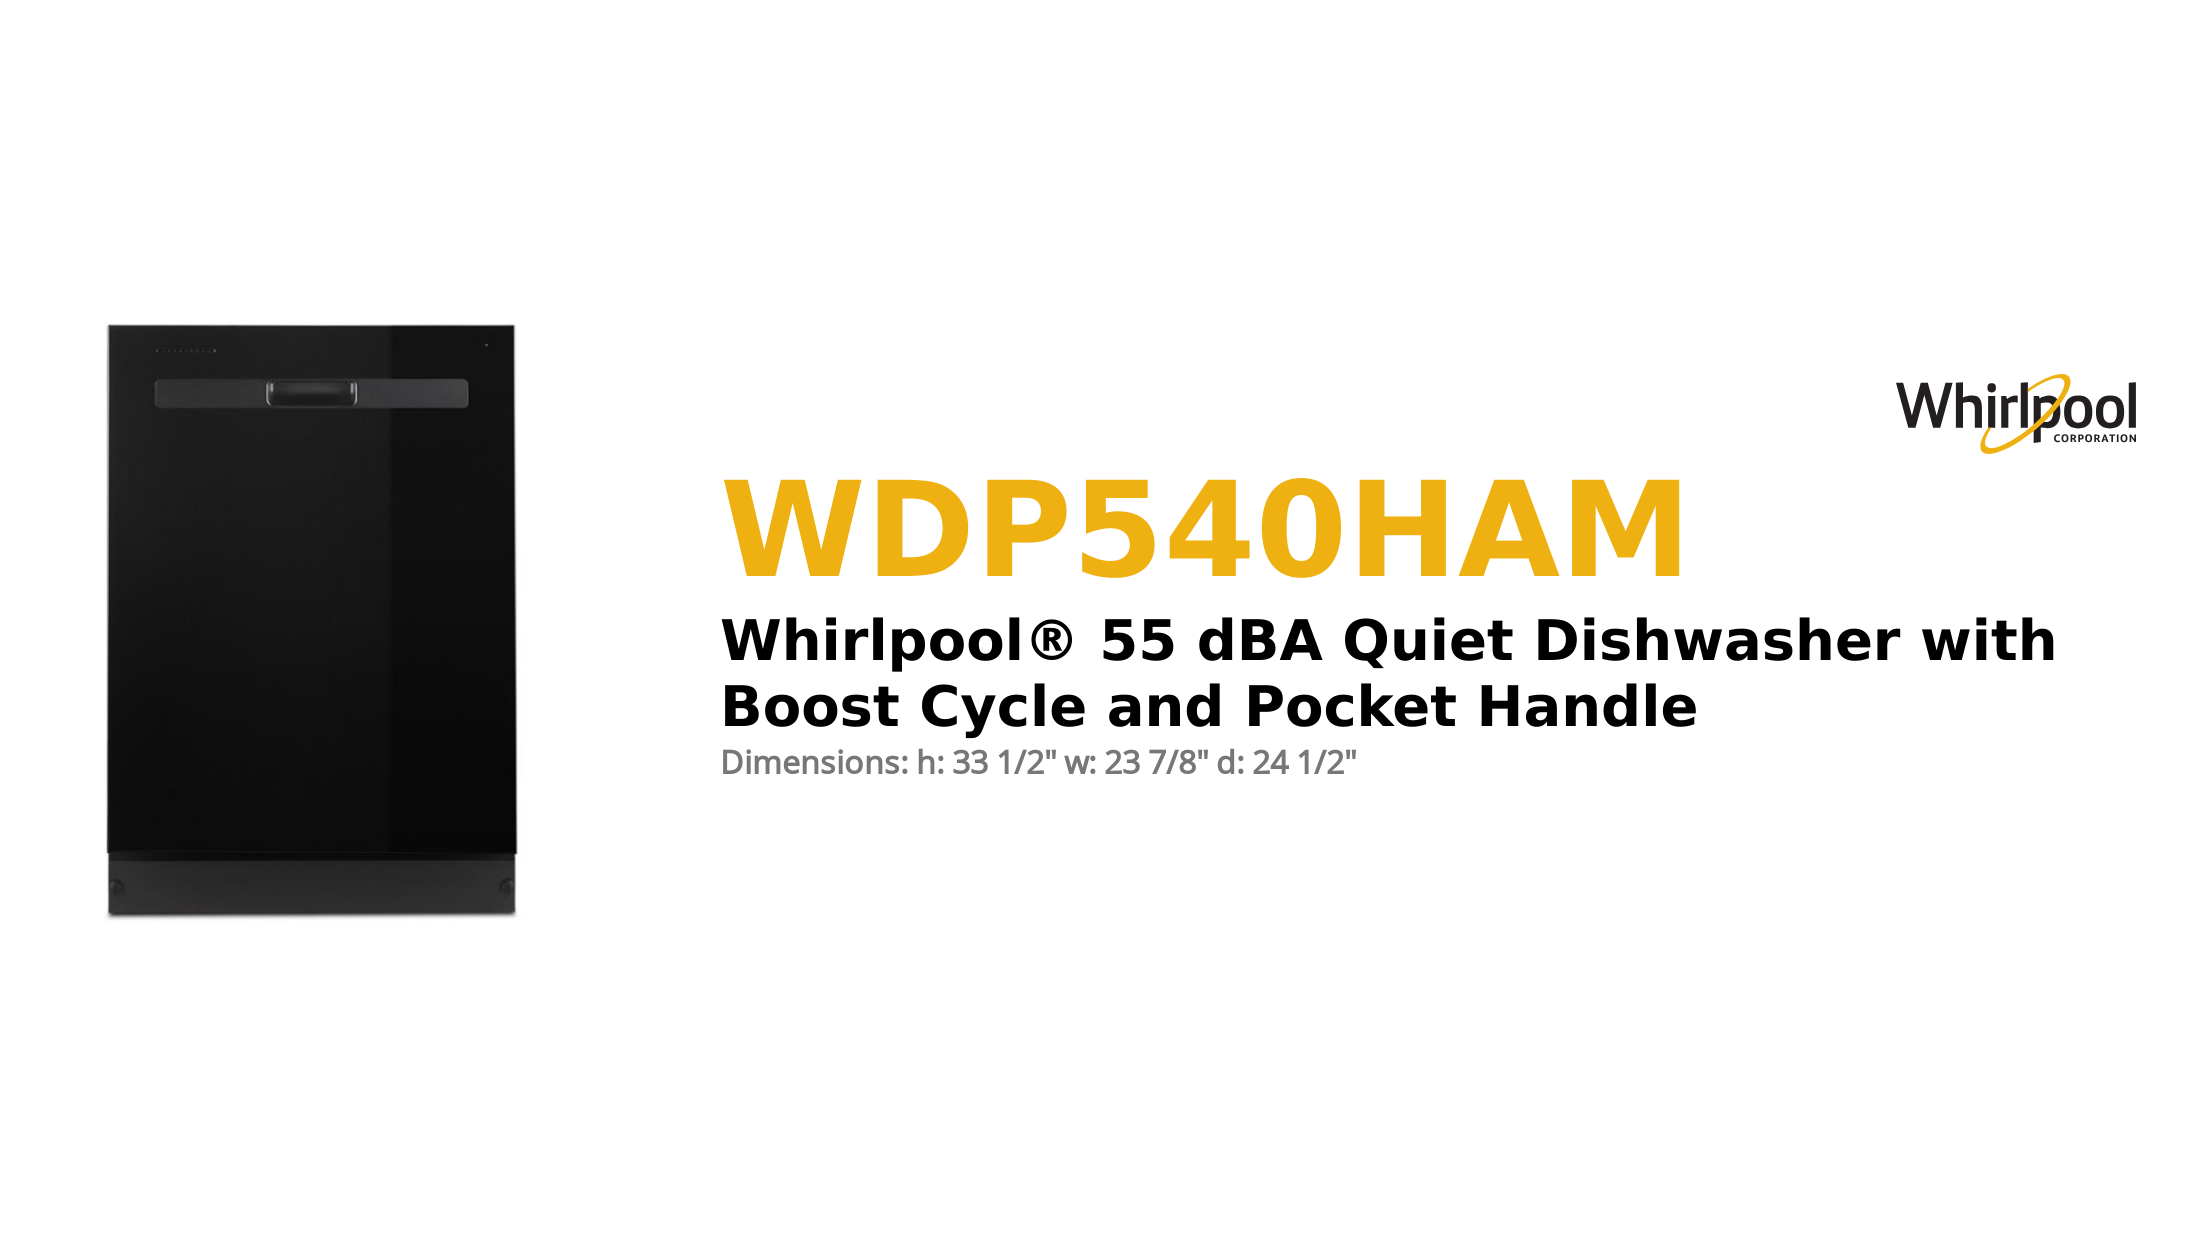 Whirlpool® 55 dBA Quiet Dishwasher with Boost Cycle and Pocket Handle